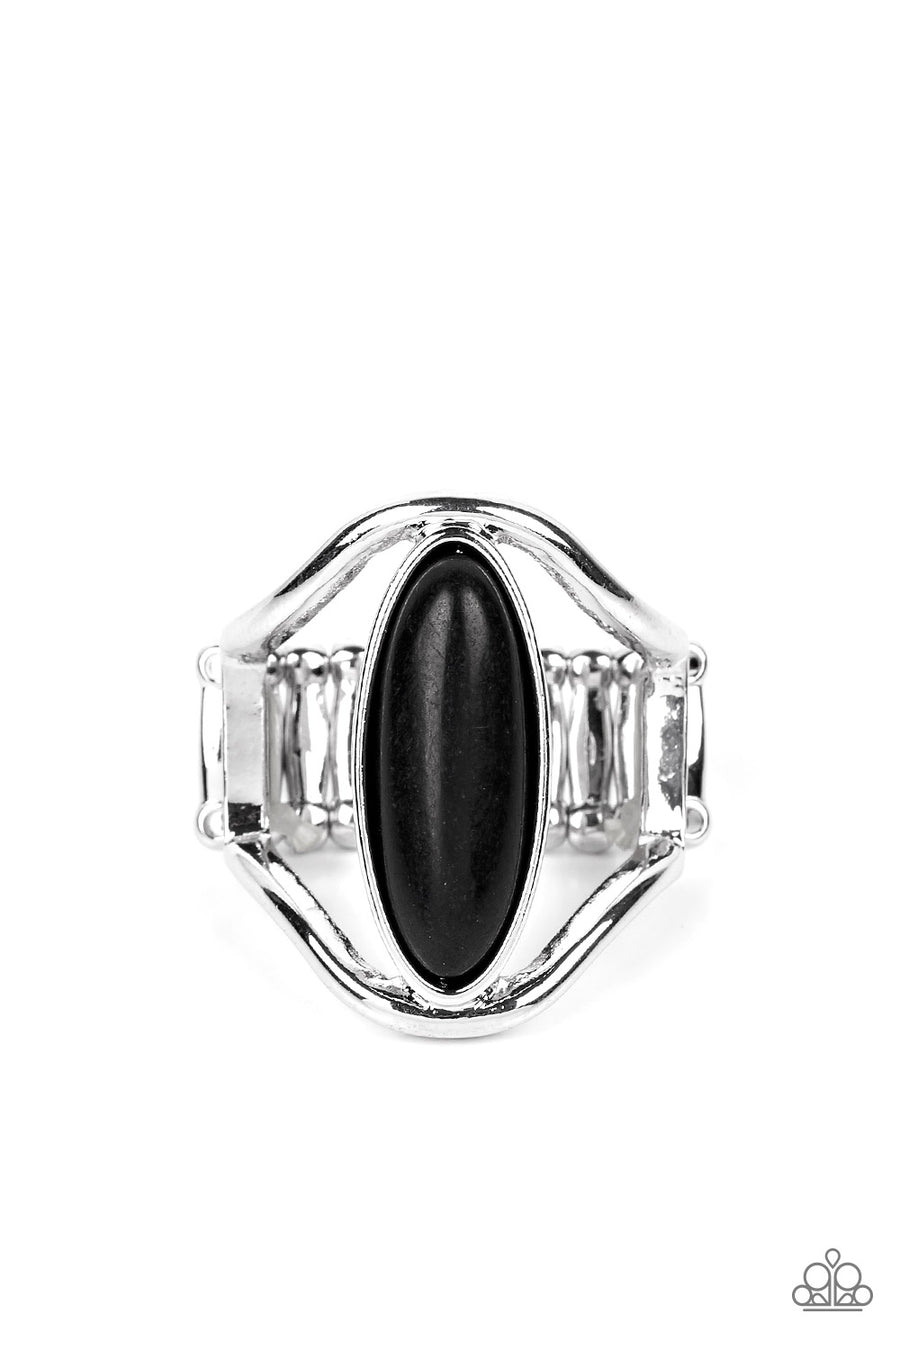 Spartan Stone - Black and Silver Ring - Paparazzi Accessories Bejeweled Accessories By Kristie